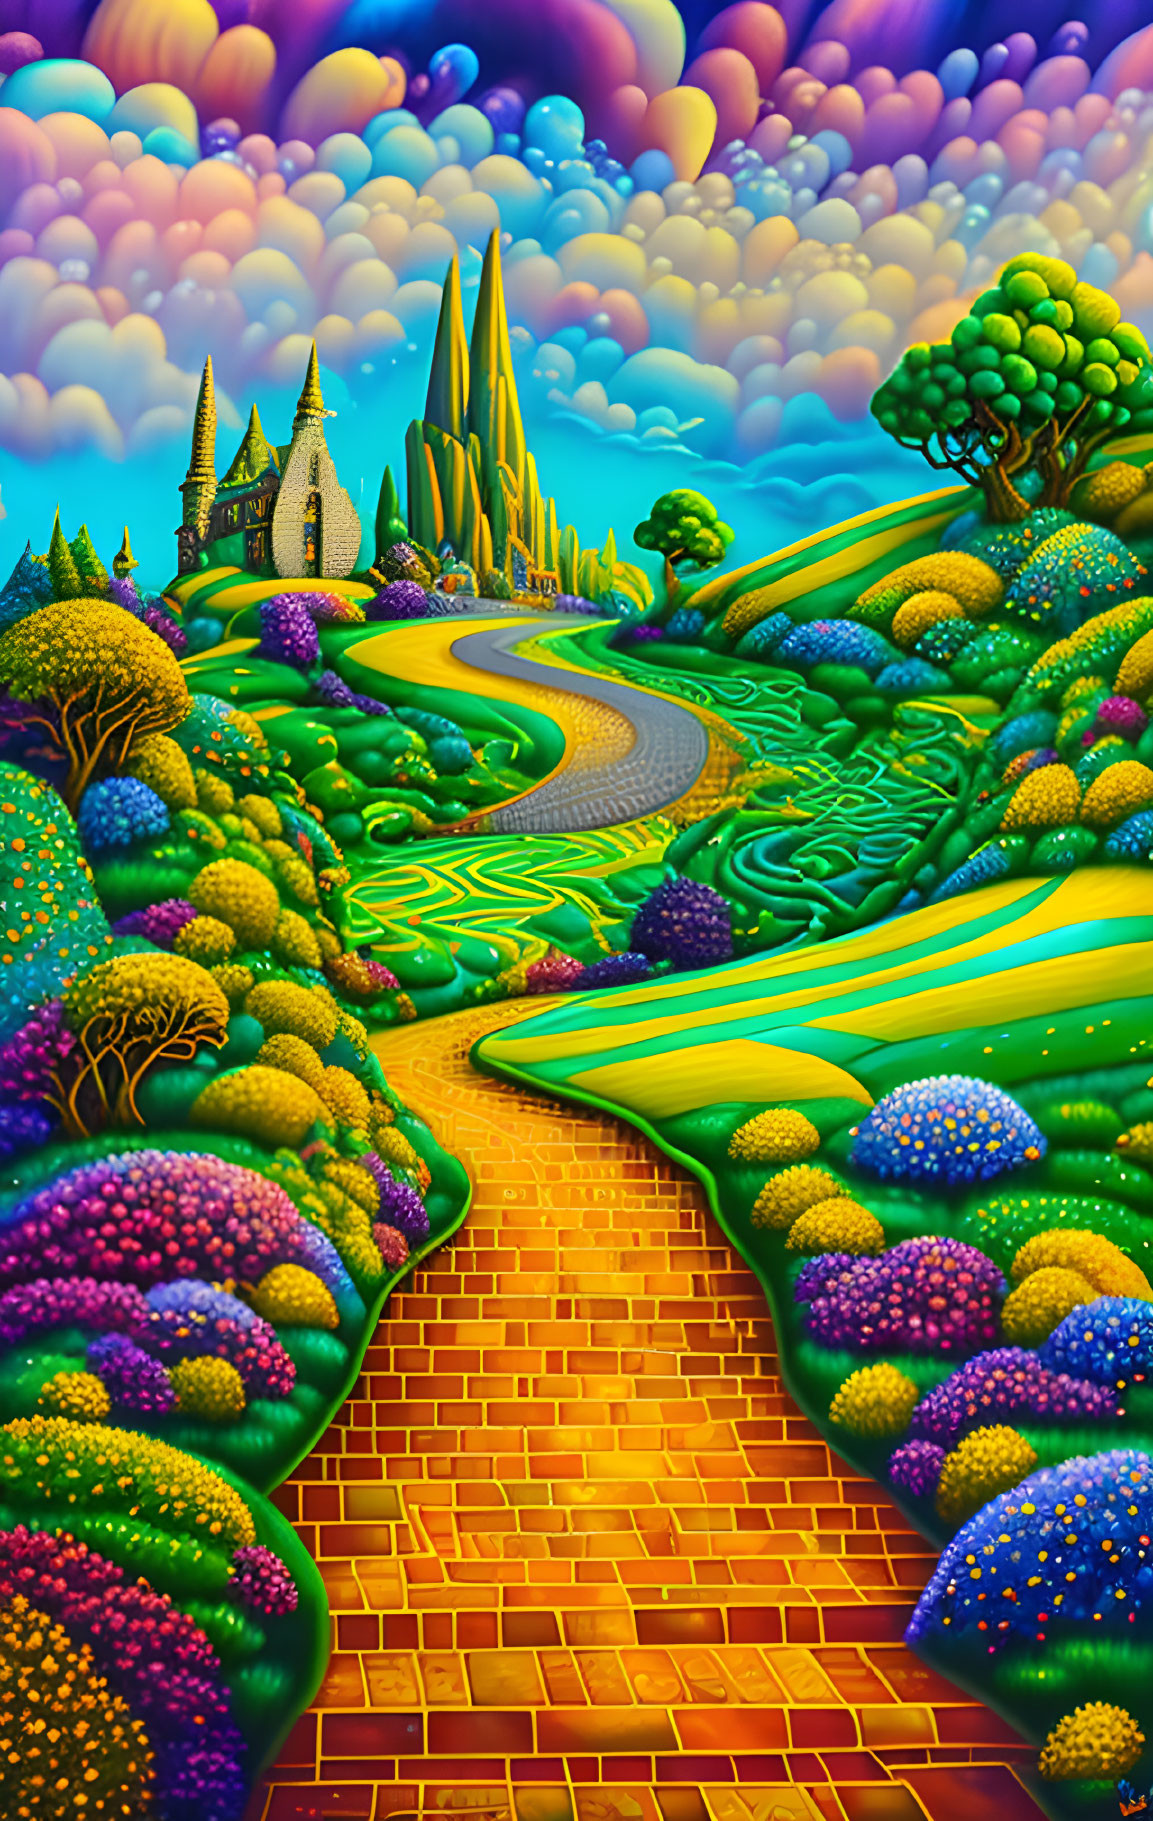 Colorful surreal landscape with yellow brick road and castle in the distance